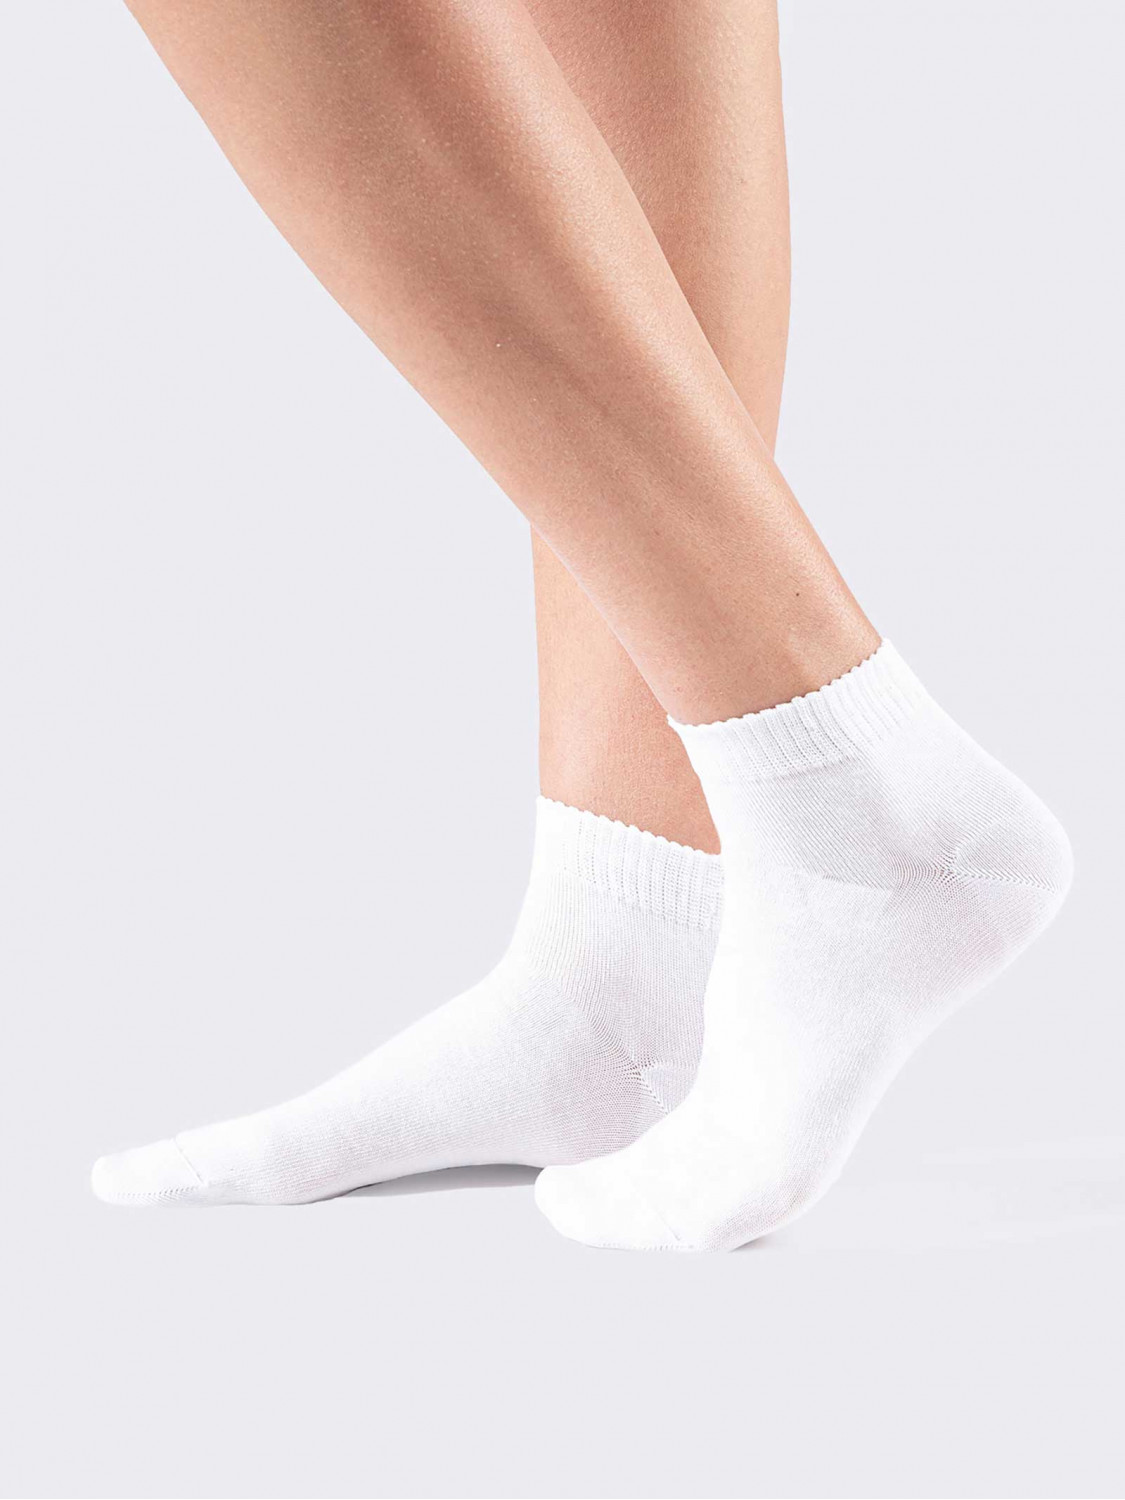 Women's Short Cotton Socks with Sporty Cuff - Made in Italy